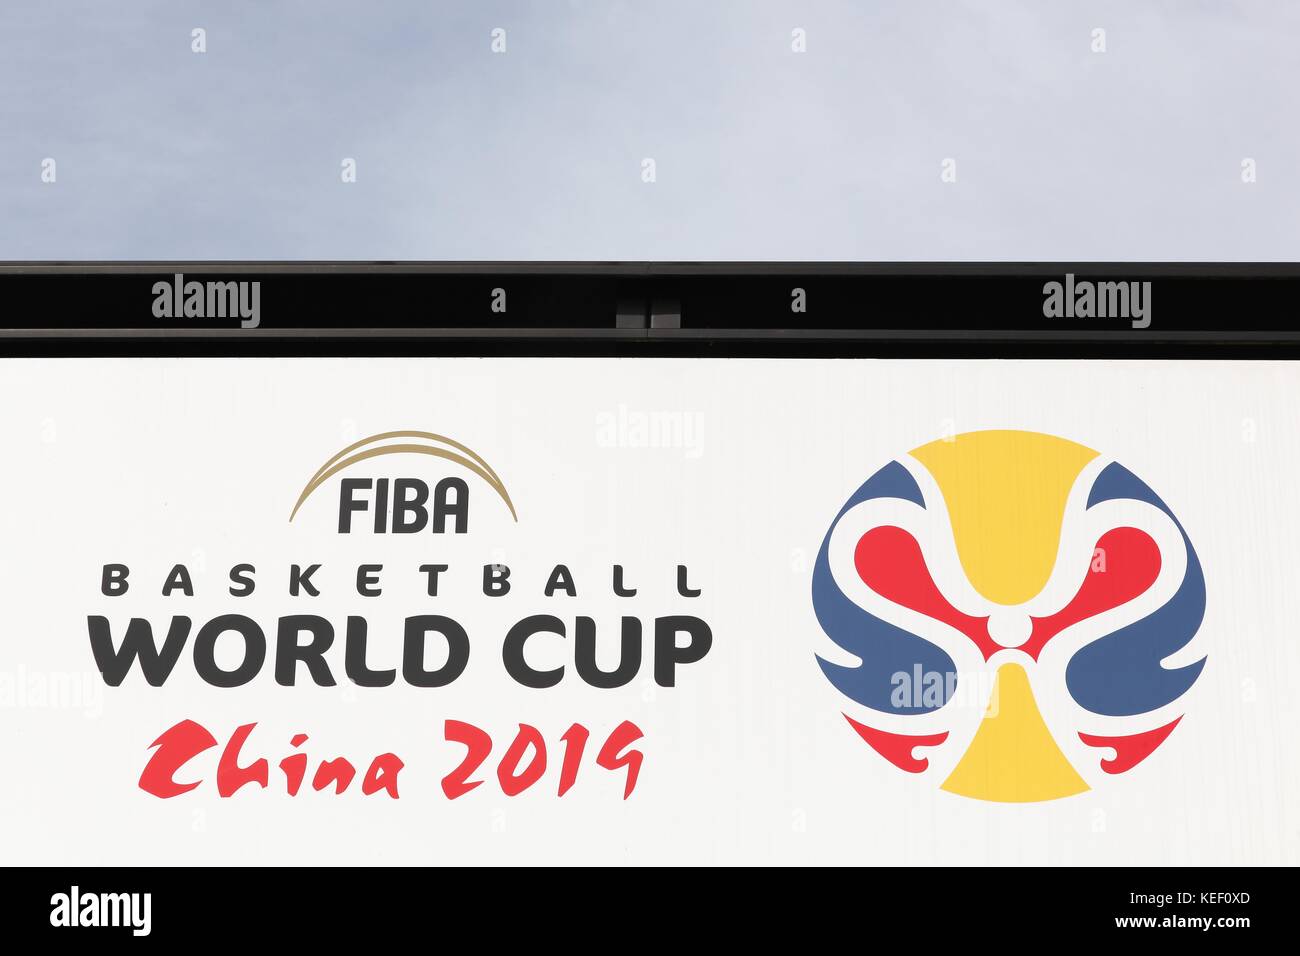 Mies, Switzerland - October 1, 2017: FIBA word cup China 2019 advert on a wall at the FIBA headquarters in Mies, Switzerland Stock Photo